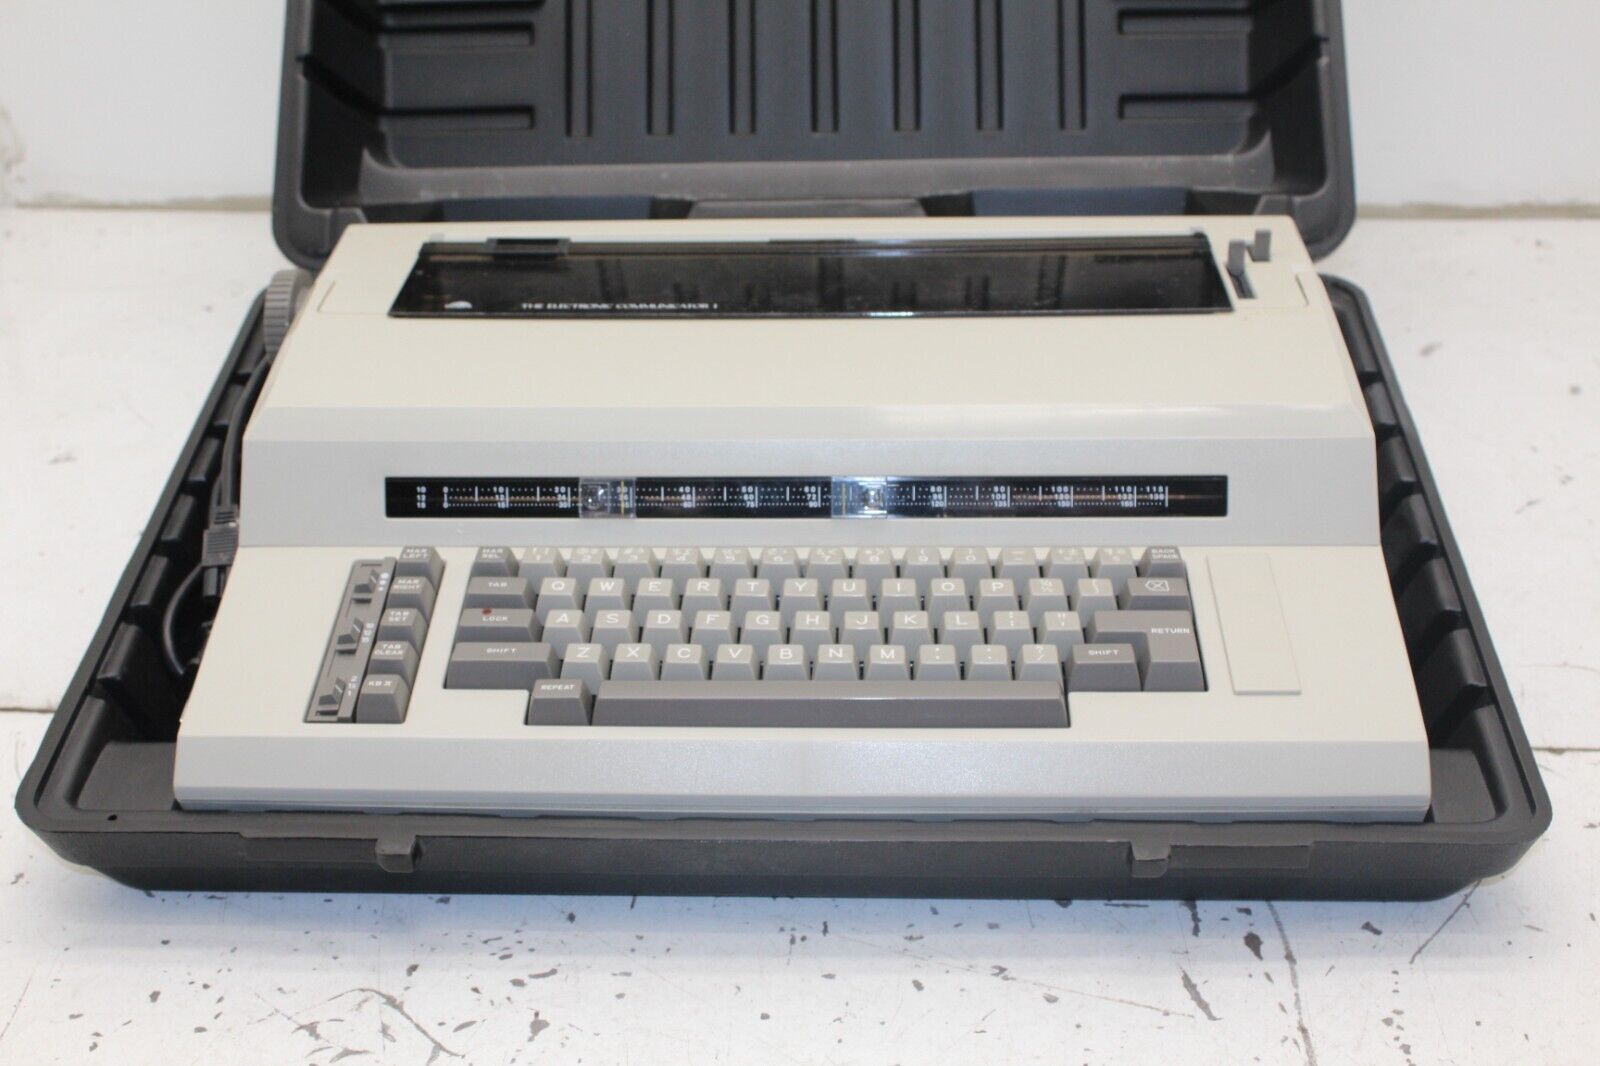 Sears The Electronic Communicator 1 Electric Typewriter w/Case Parts/Repair